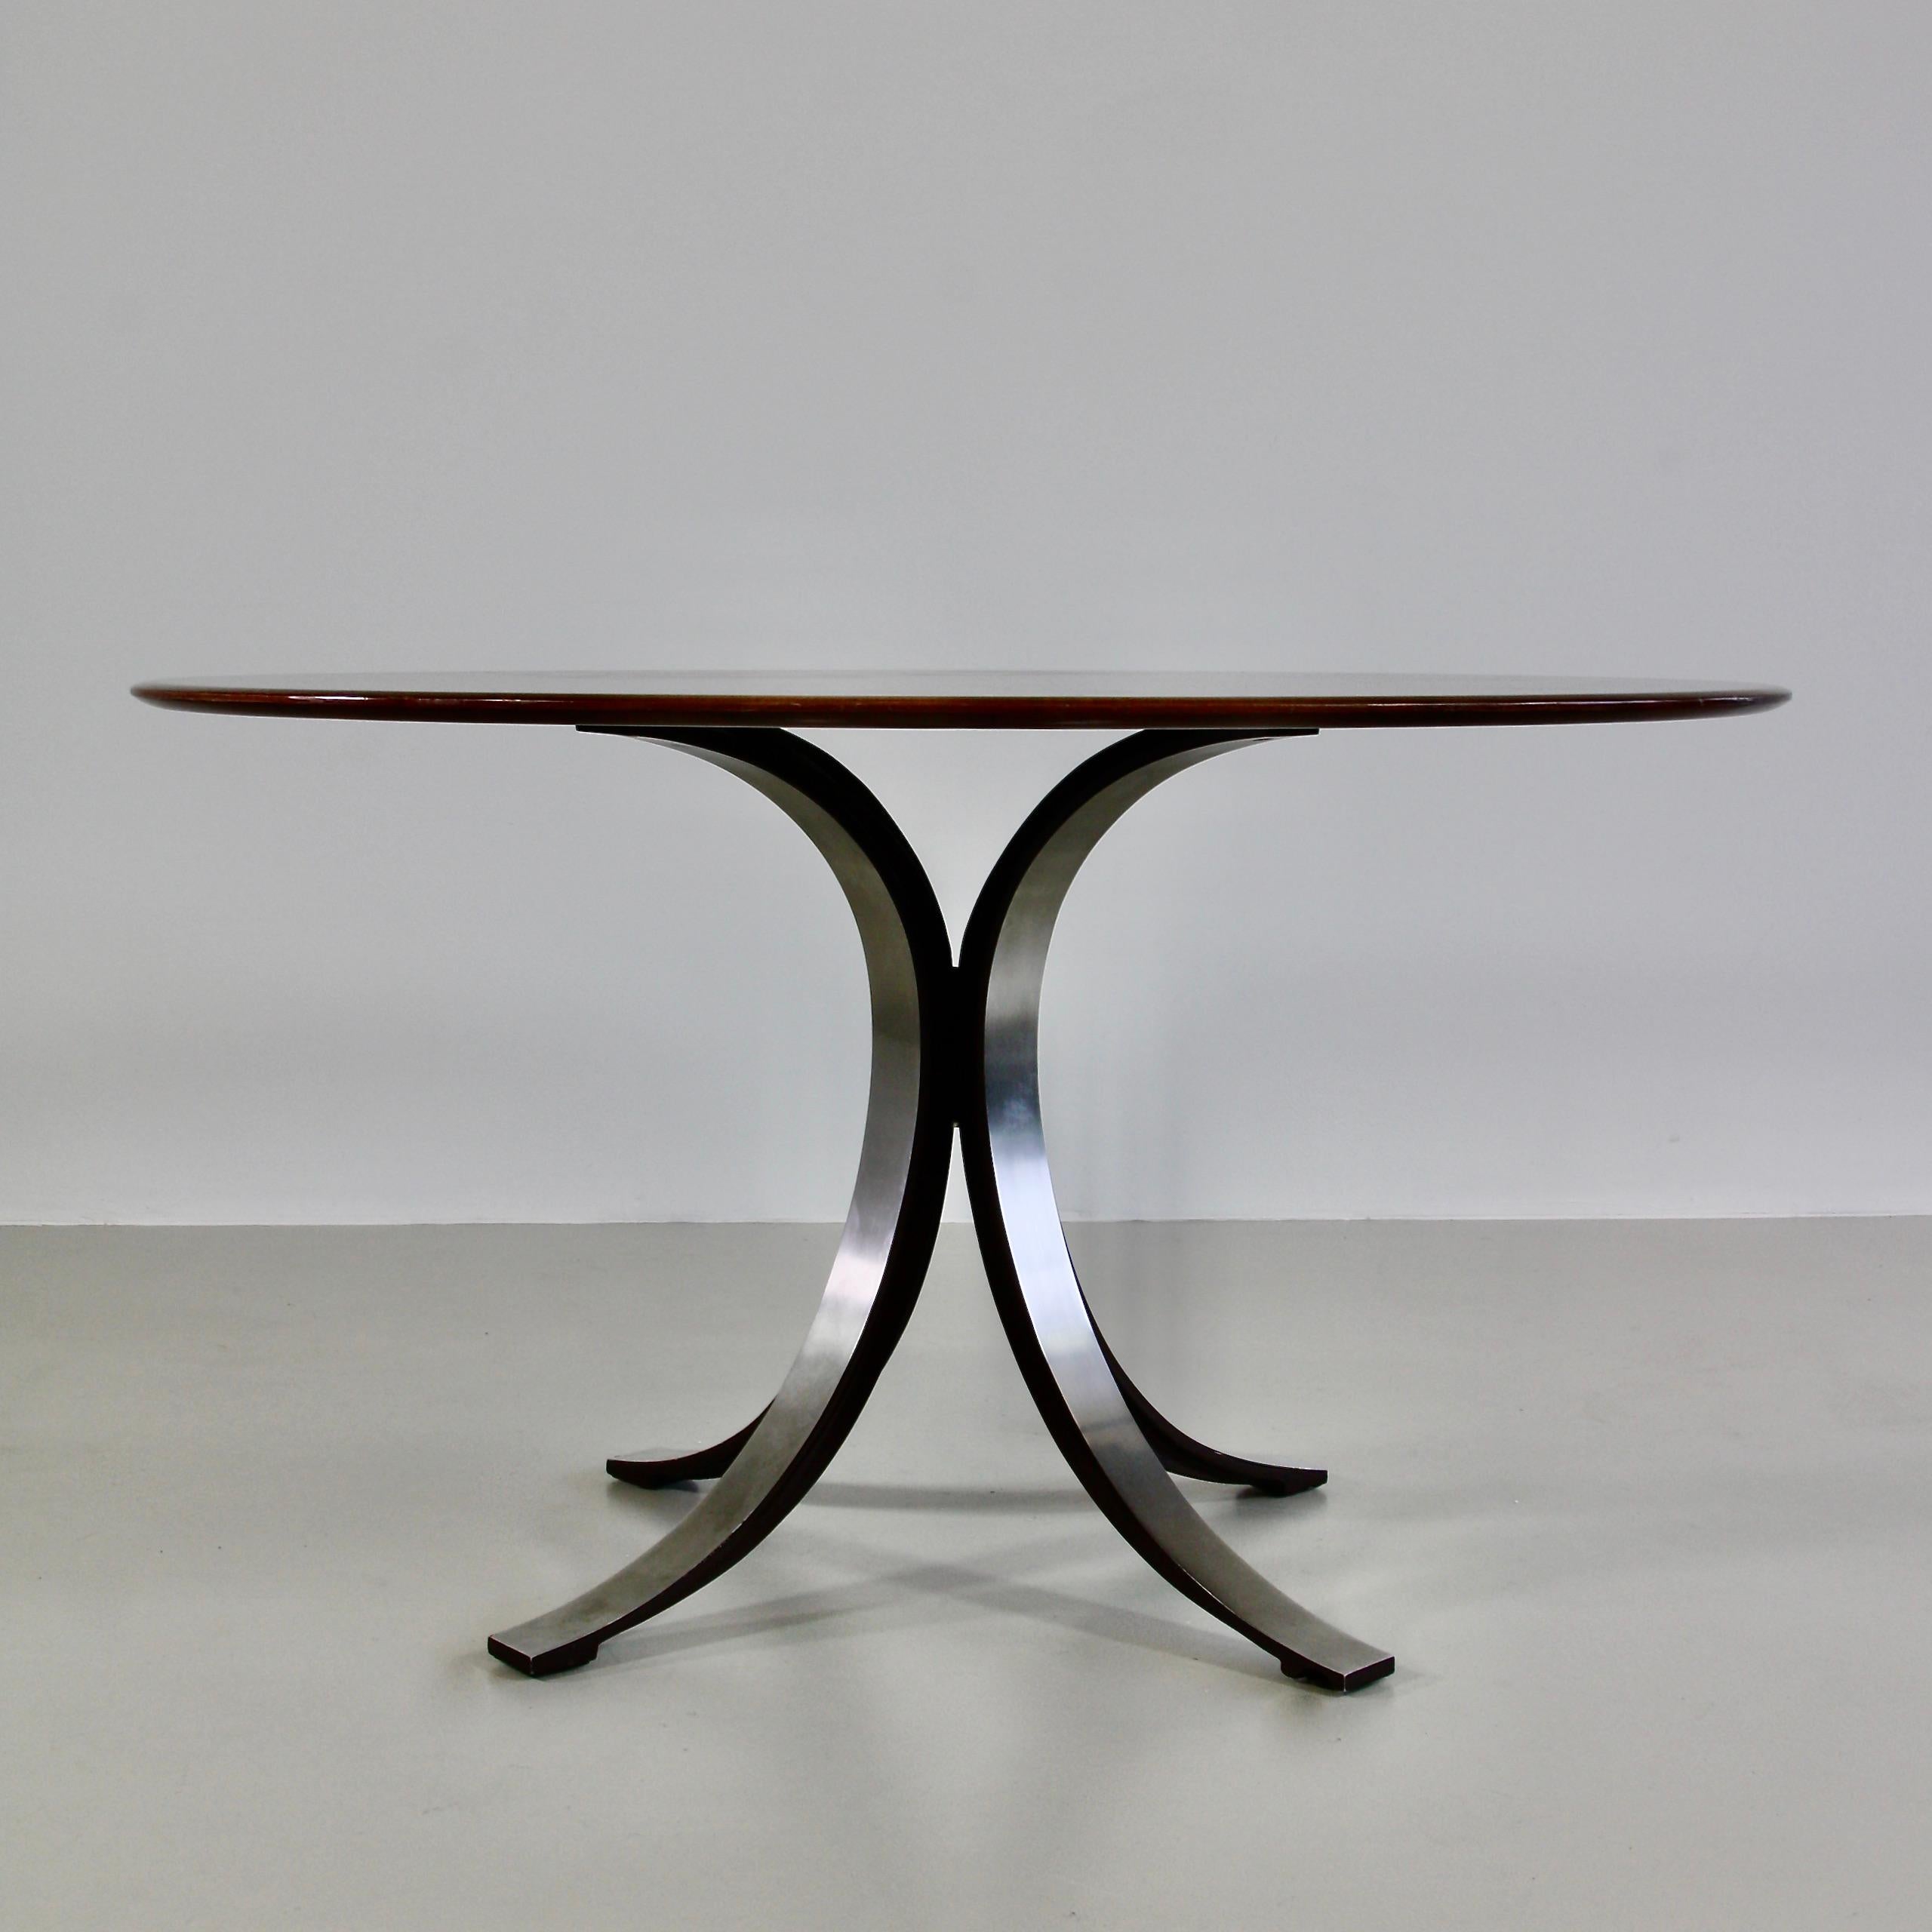 Round dining table (T69A) designed by Osvaldo Borsani in 1963-1964. Produced by TECNO.

Brushed metal base with the inner sides finished in matt dark brown enamel. Original wooden round table top.

Literature:

- Repertorio del Design